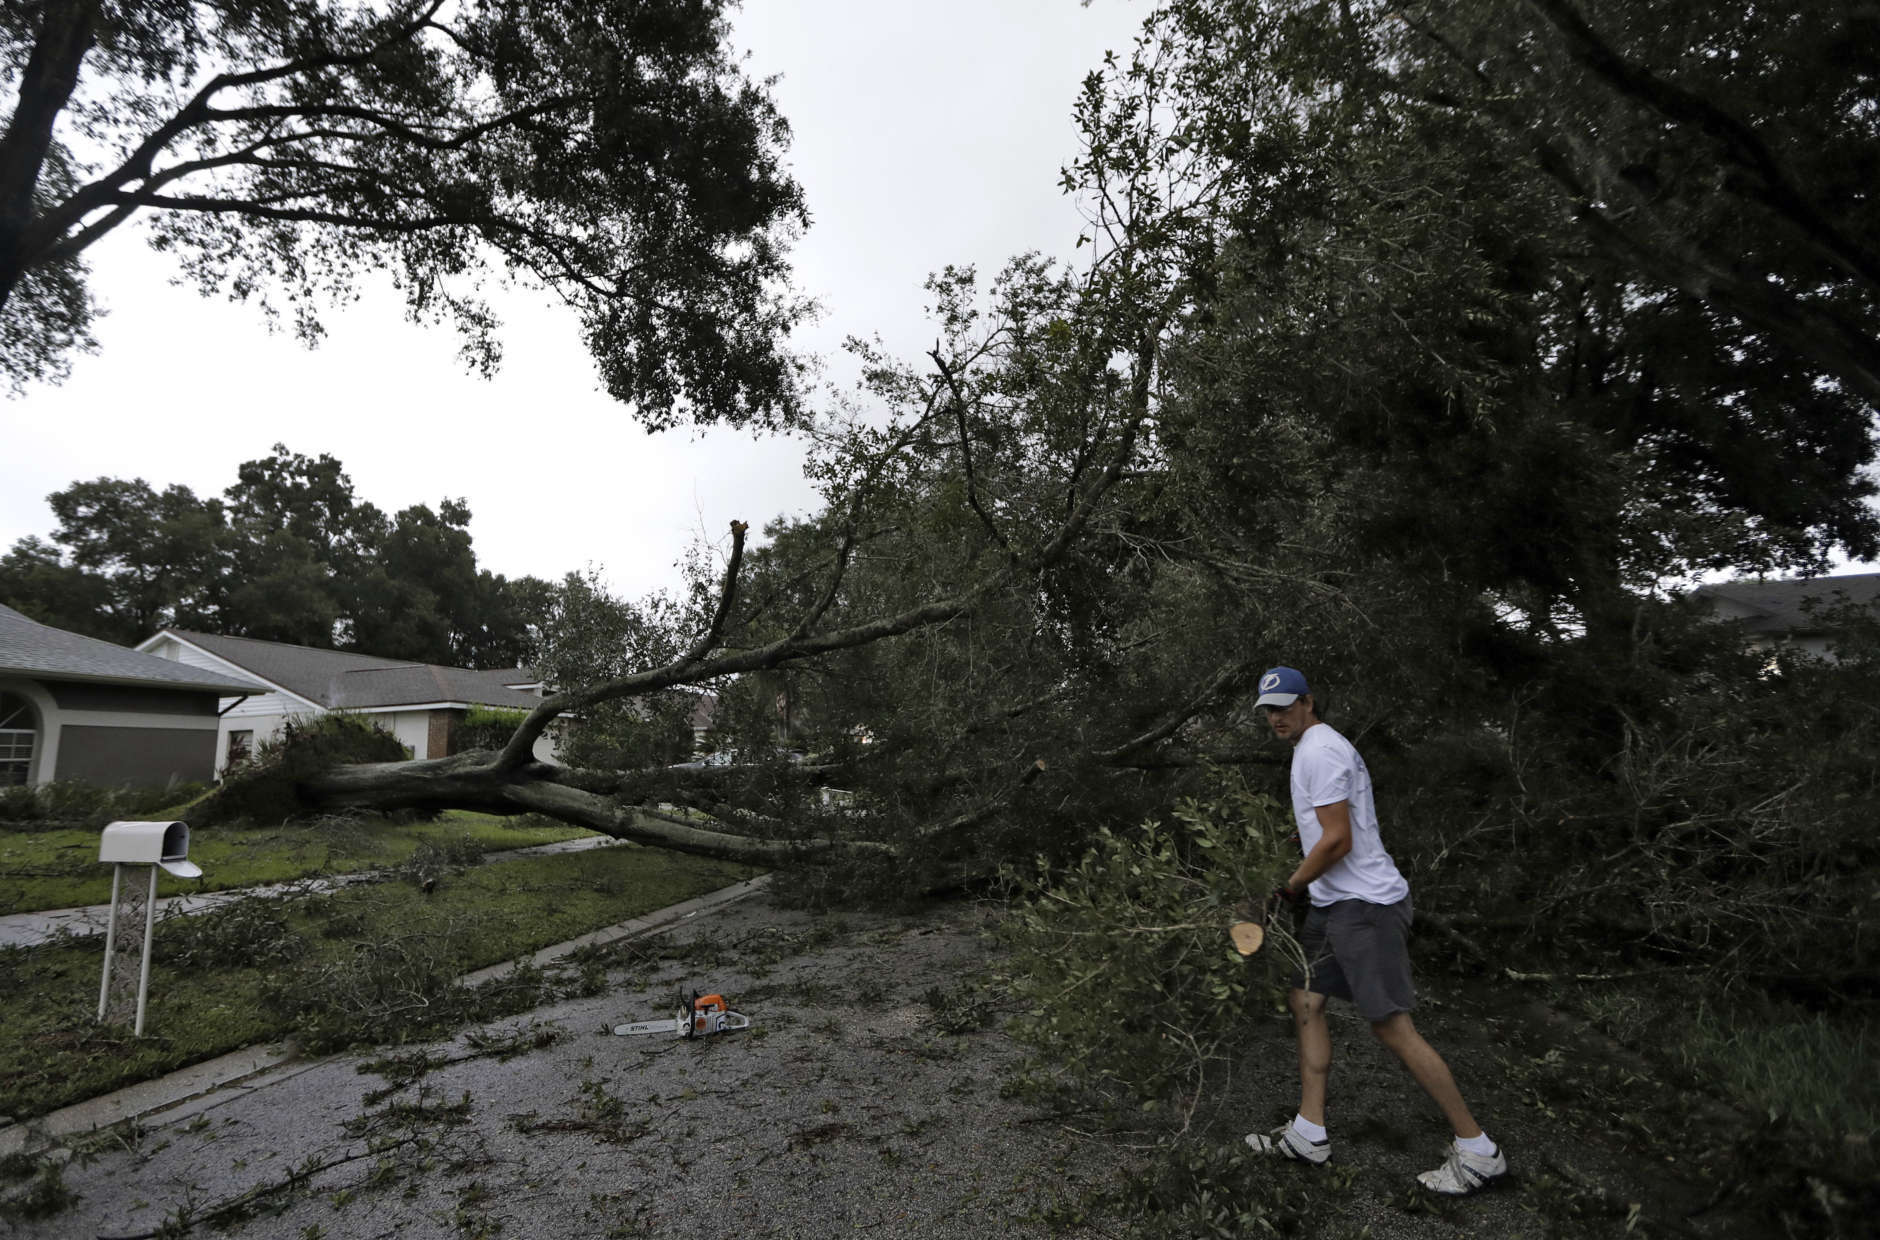 Brian Baker, of Valrico, Fla., cuts up an Oak tree that fell across Falling Leaves Drive after Hurricane Irma passed through the area, Monday, Sept. 11, 2017, in Valrico, Fla. (AP Photo/Chris O'Meara)